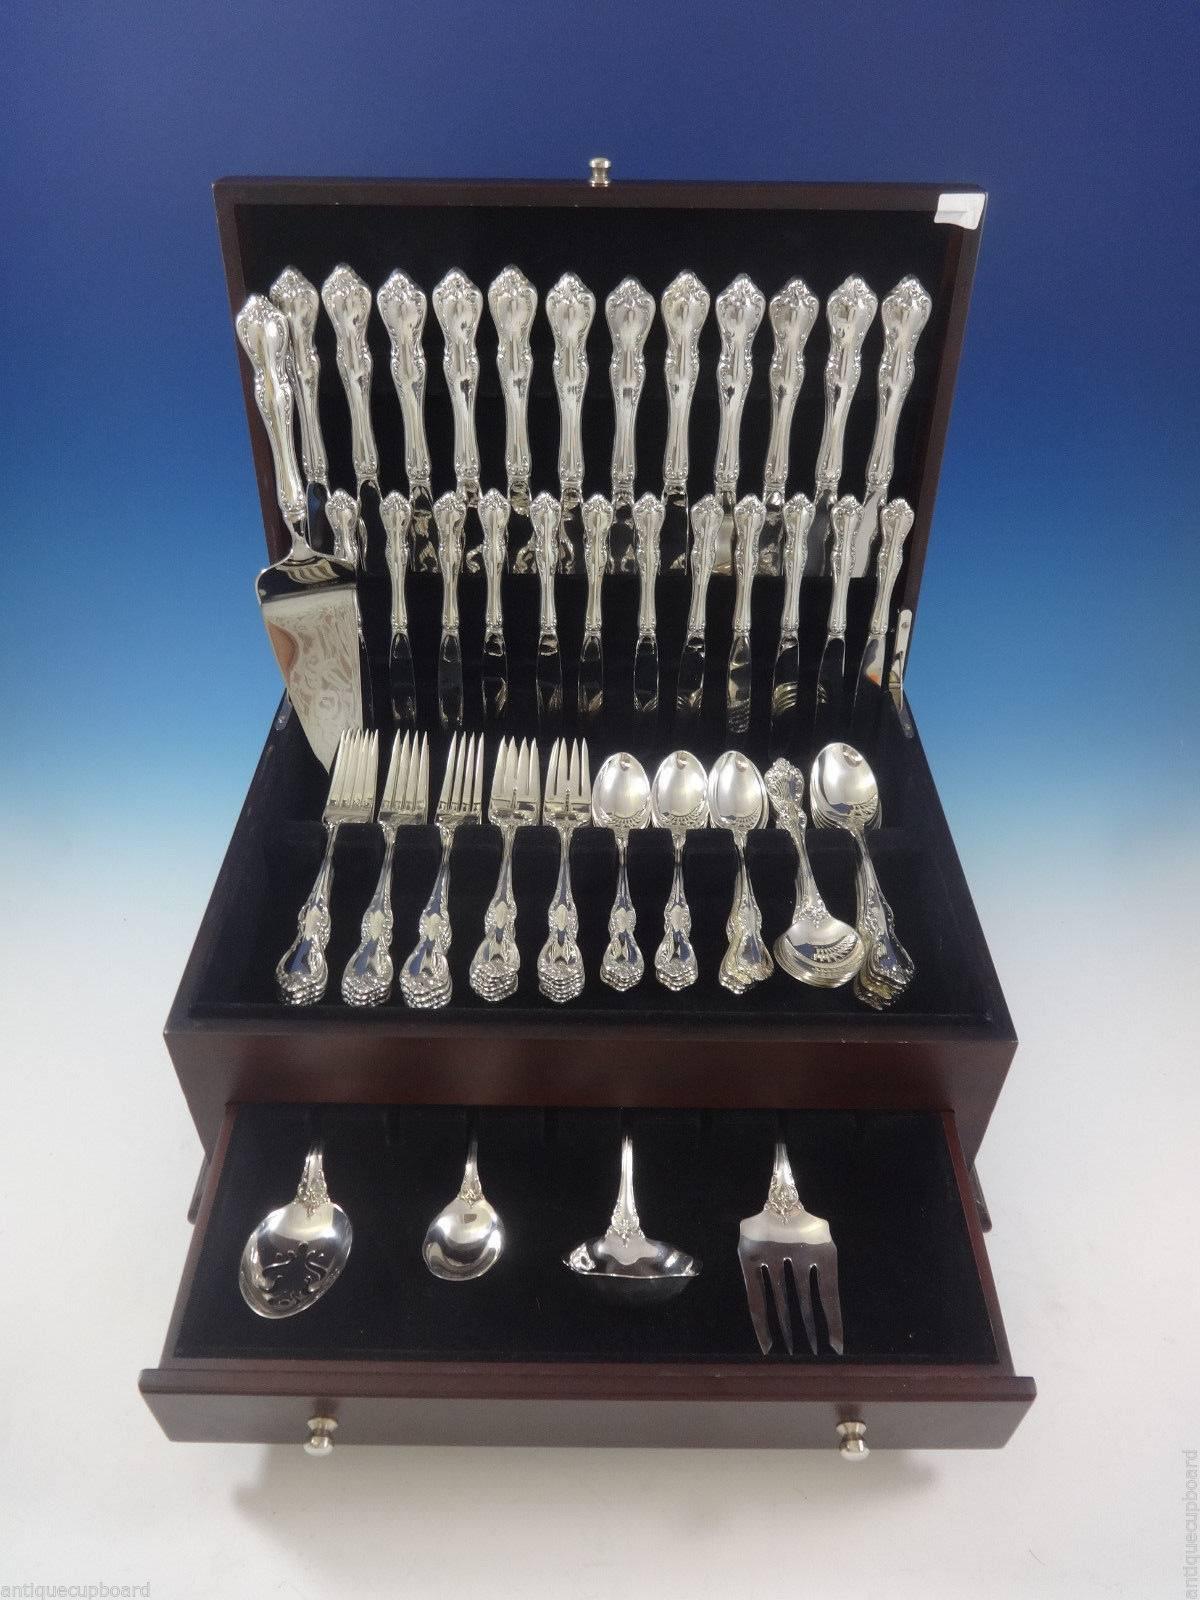 Stunning Debussy by Towle sterling silver flatware set of 77 pieces. This set includes: 

12 knives, 9